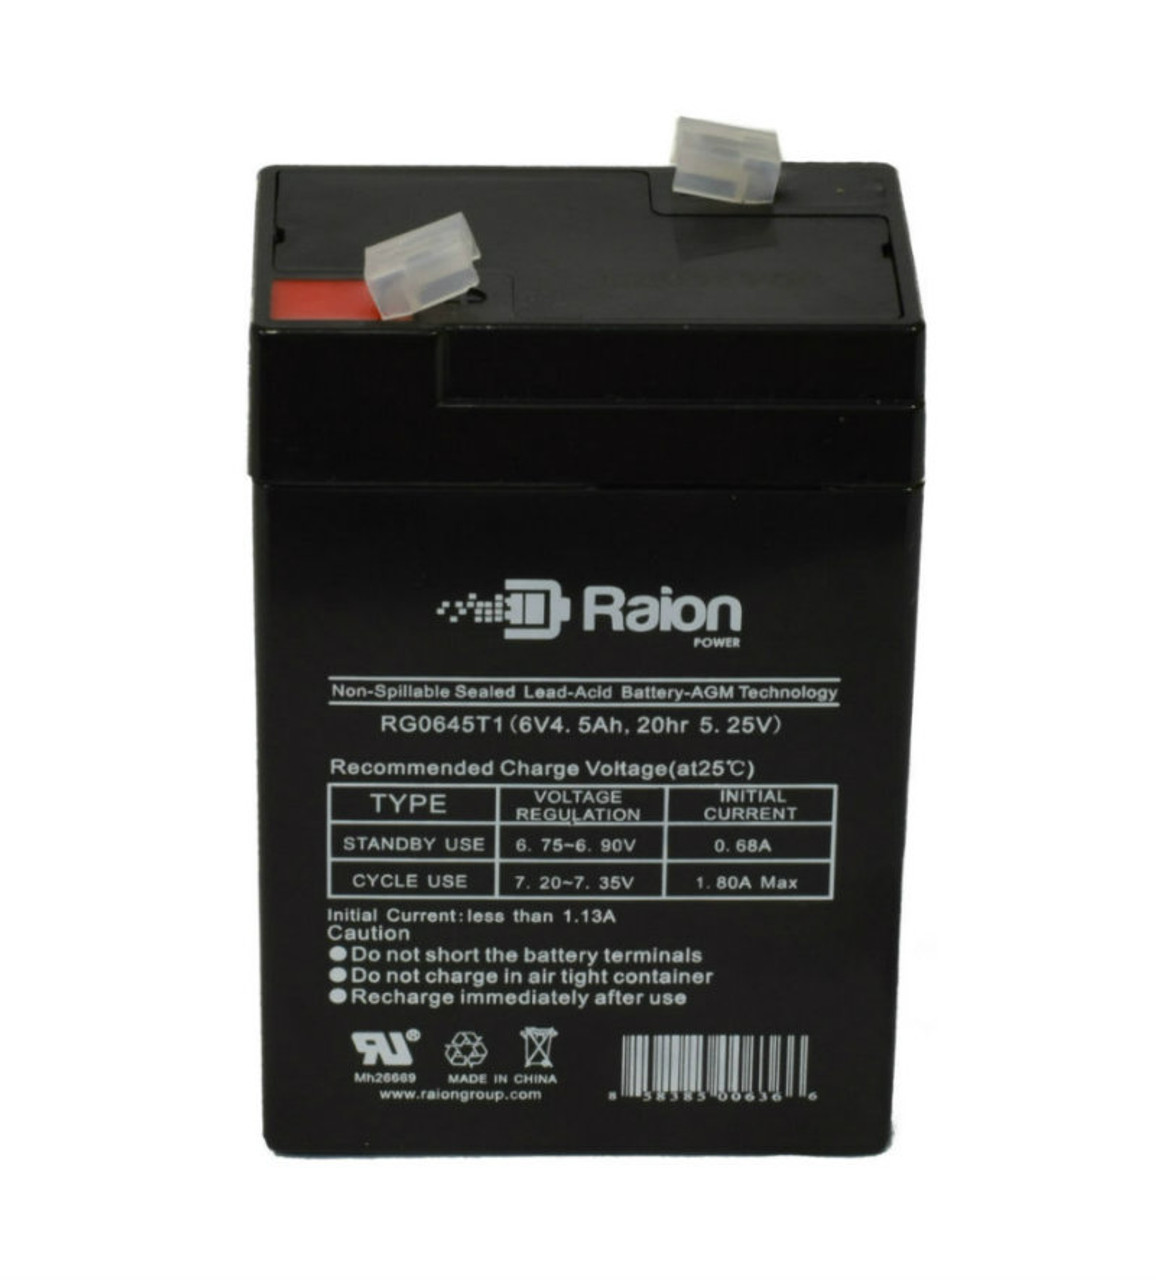 Raion Power RG0645T1 Replacement Battery Cartridge for Consent GS64